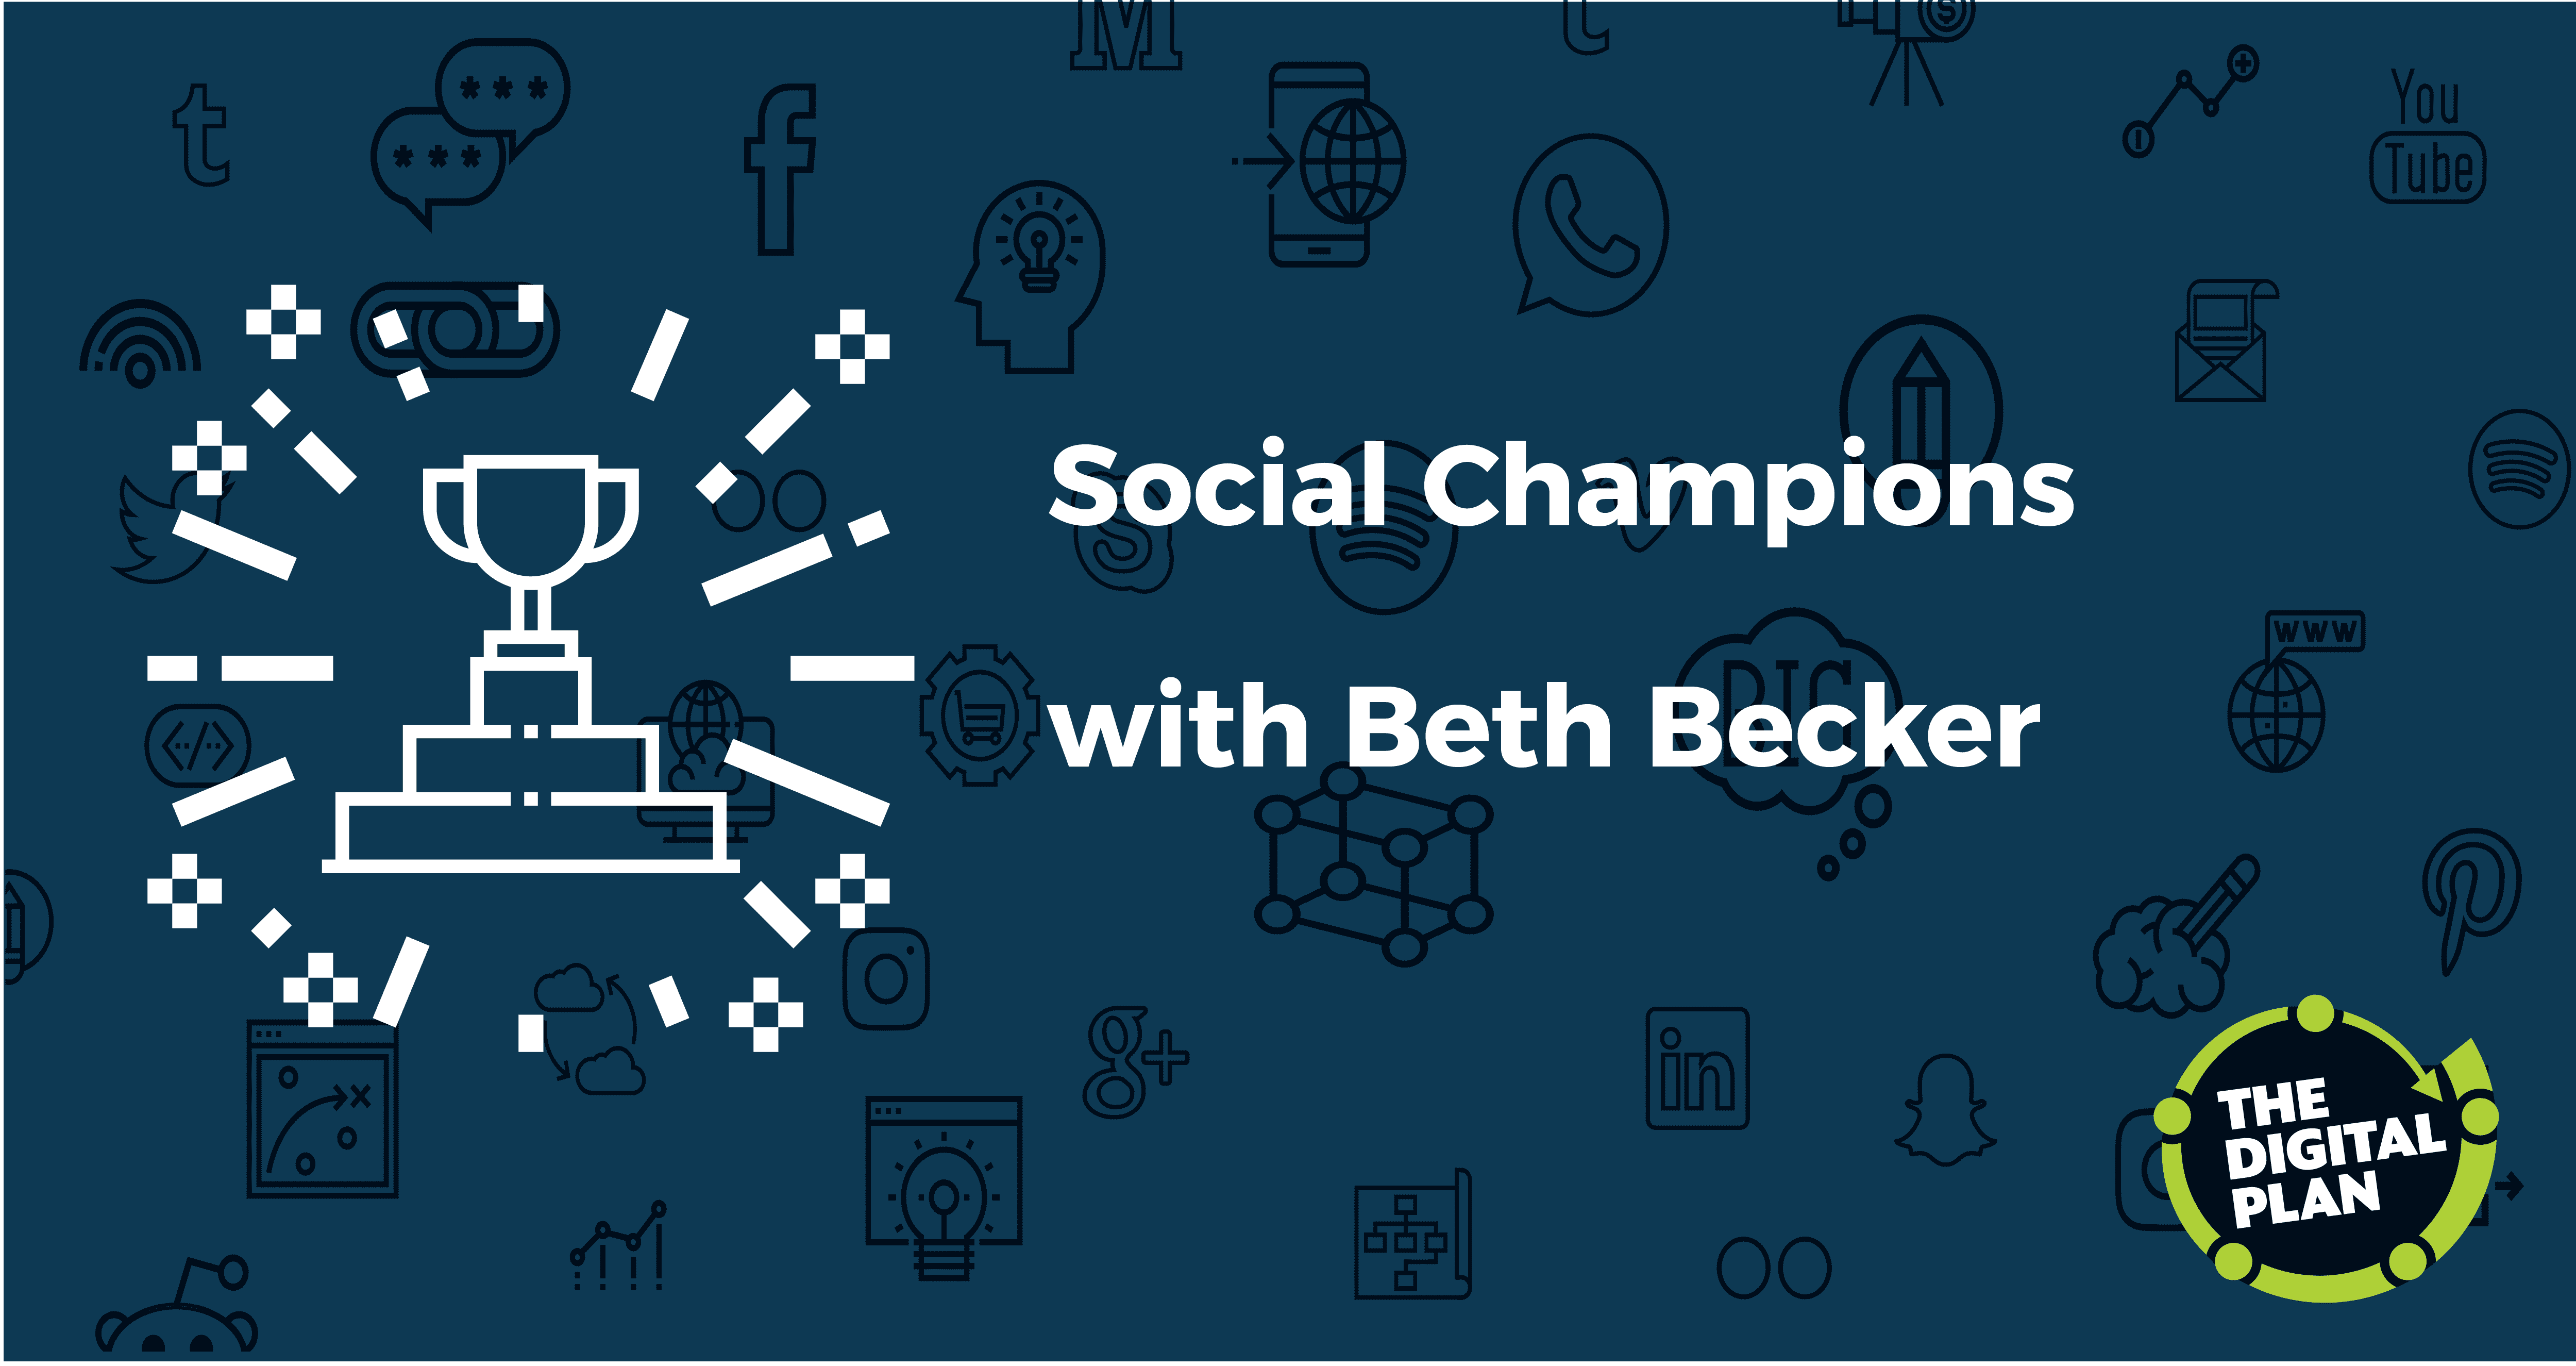 Social Media Champions with Beth Becker